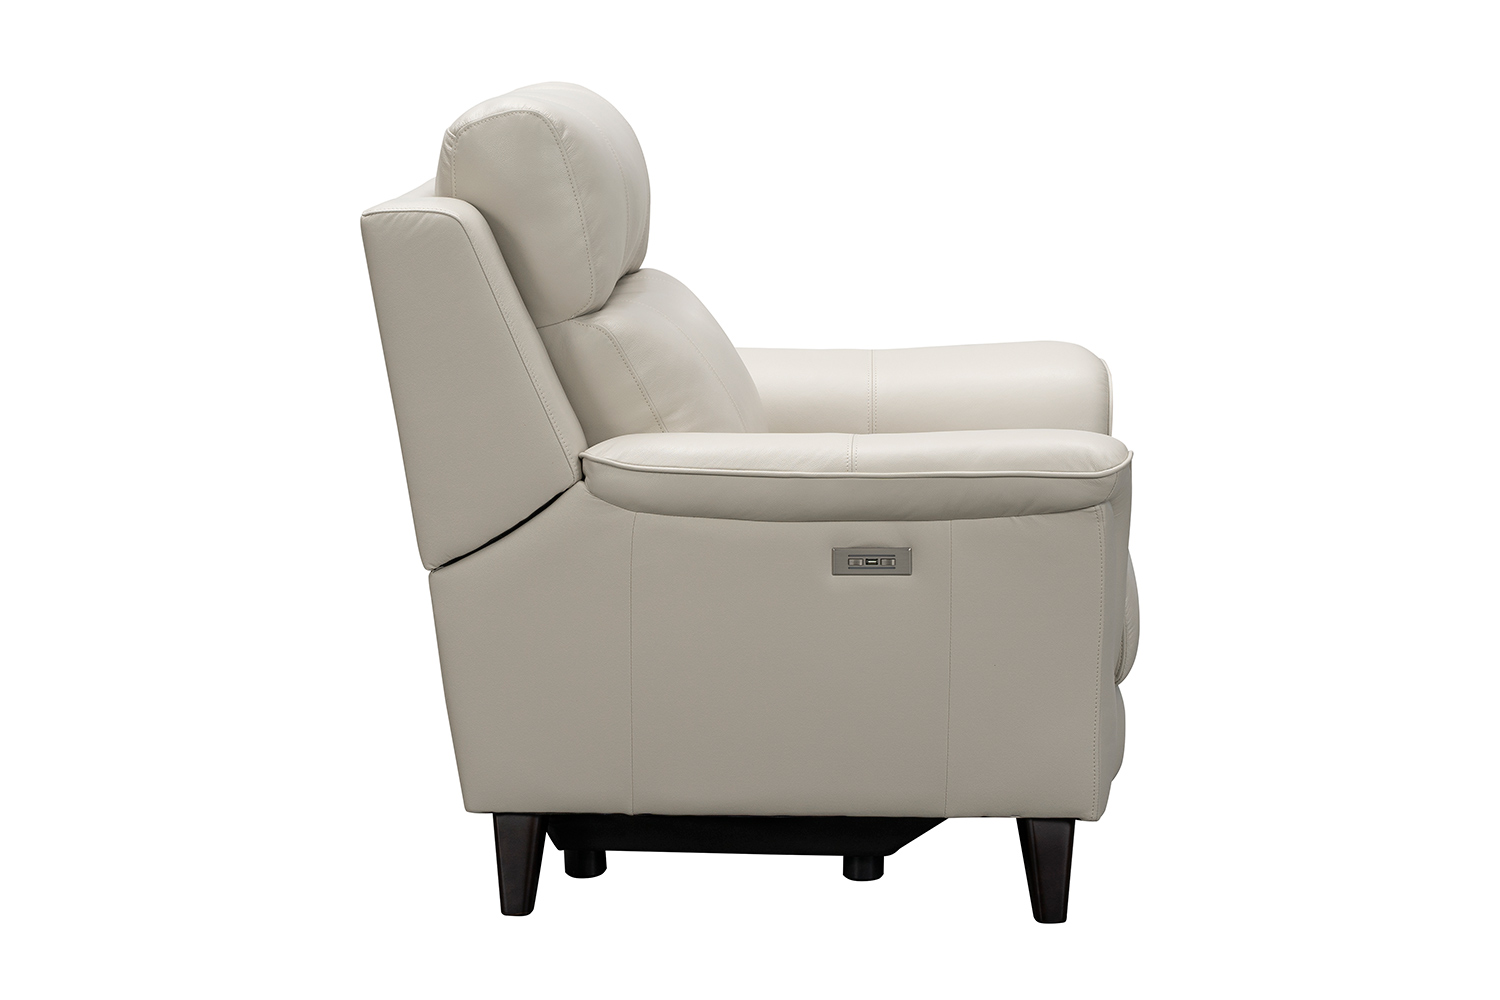 Barcalounger Kester Power Recliner Chair with Power Head Rest - Laurel Cream/Leather match